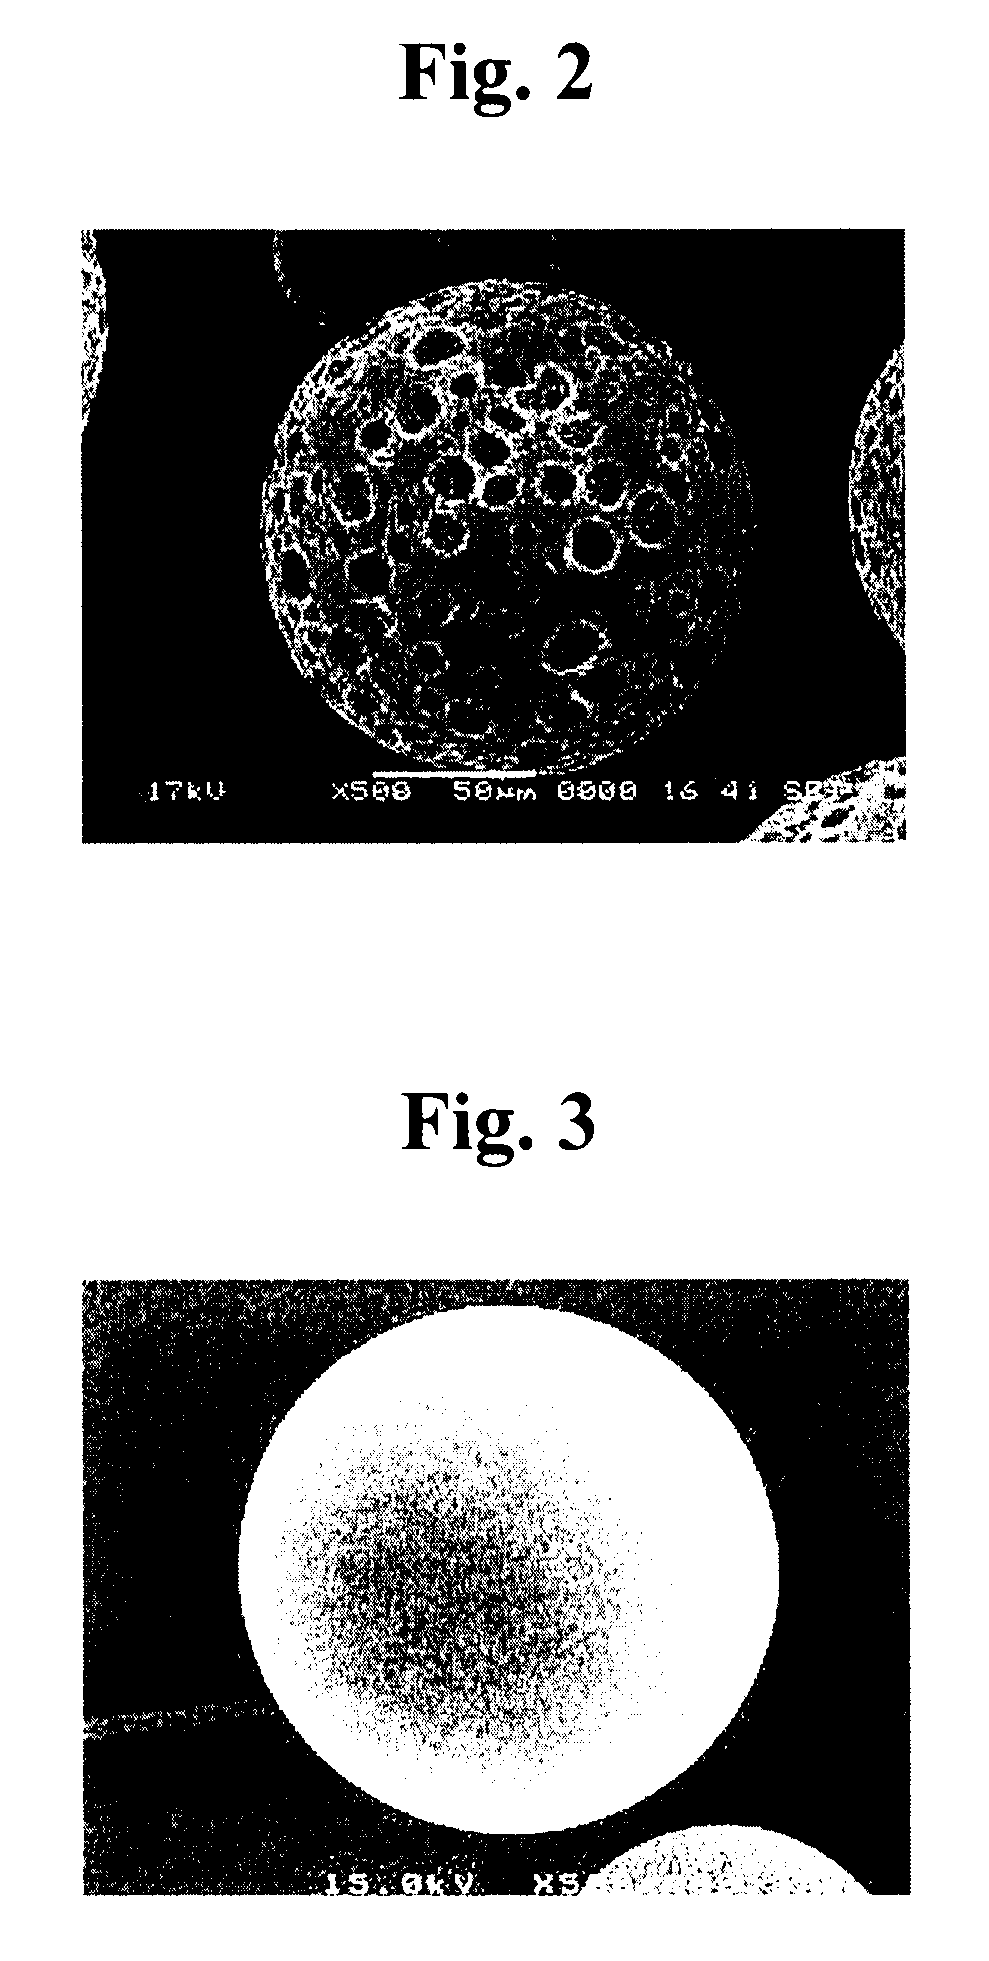 Method of preparing covered porous biodegradable polymer microspheres for sustained-release drug delivery and tissue regeneration